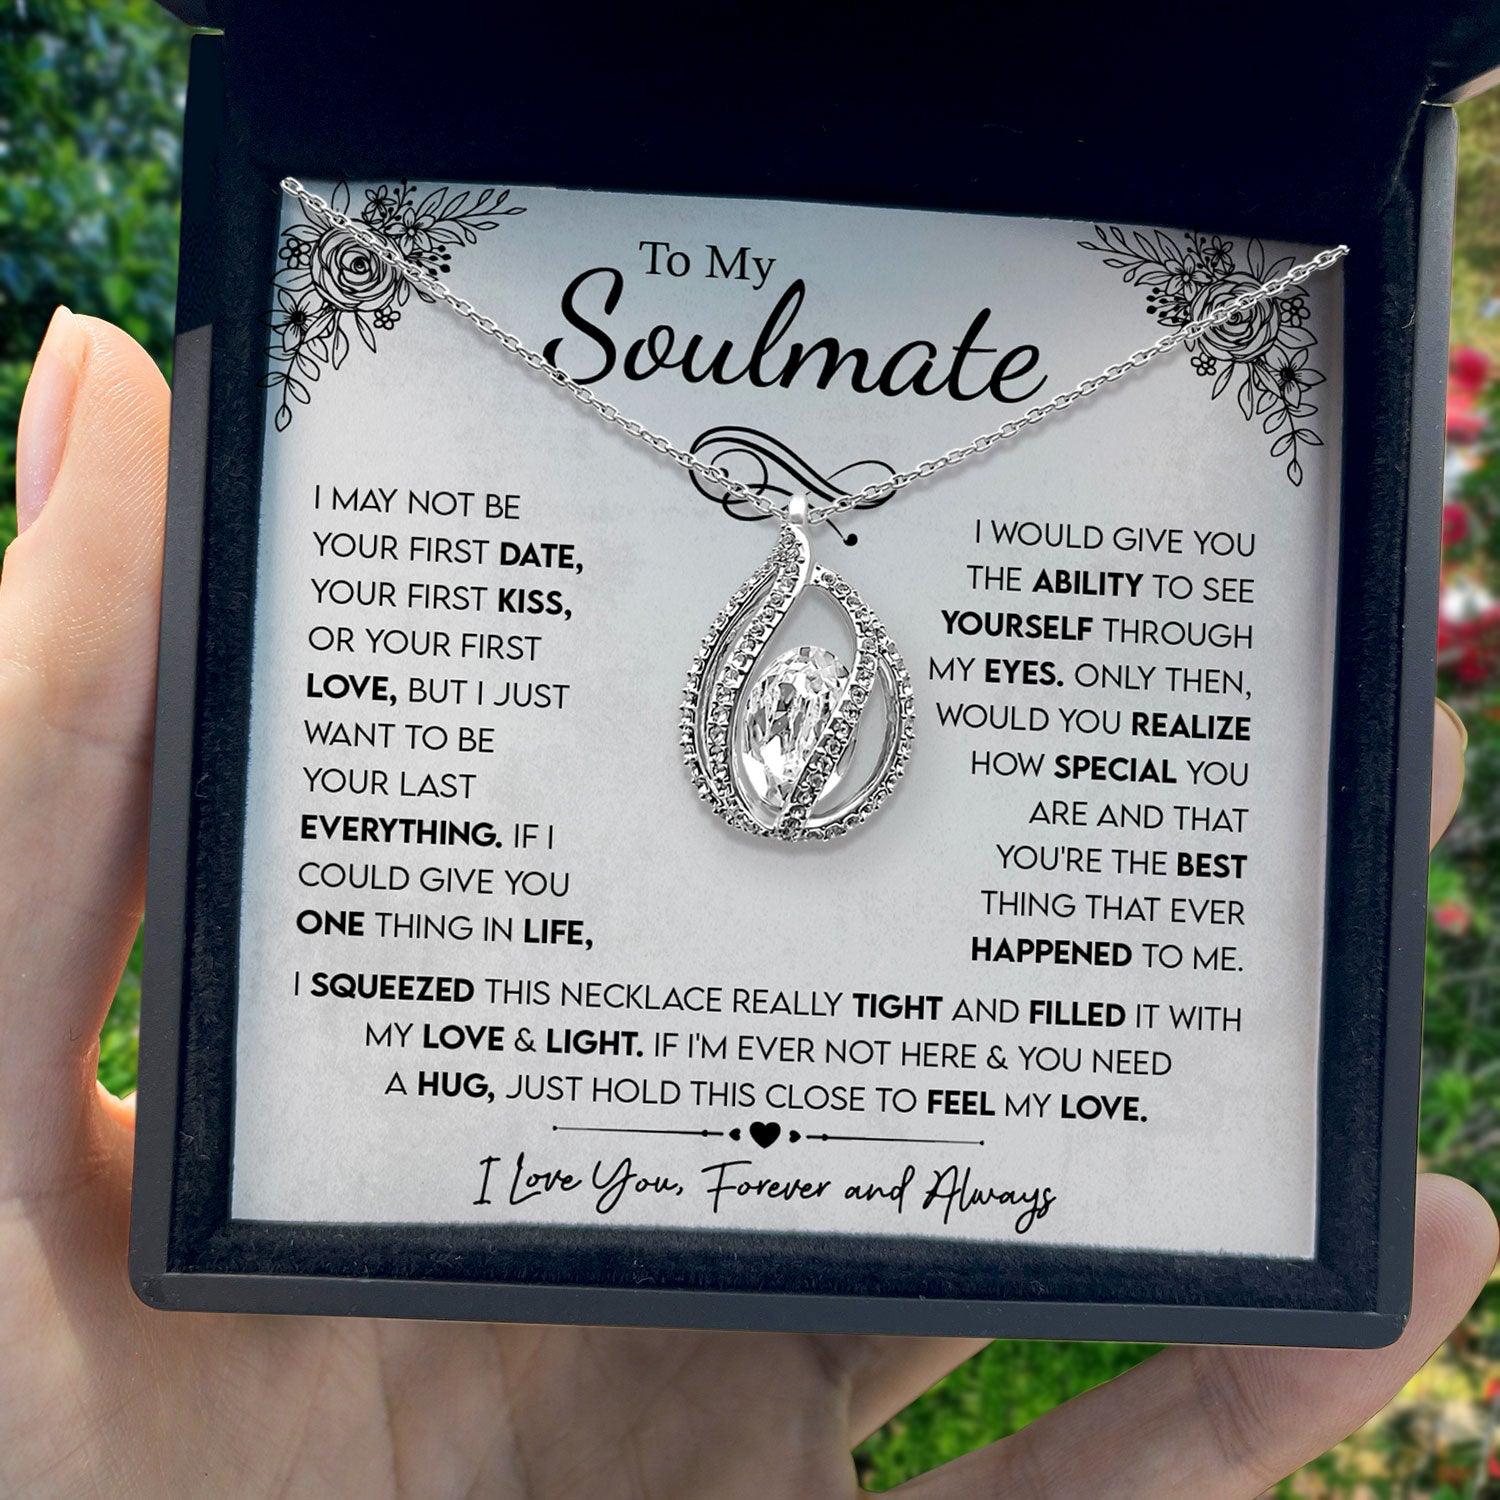 To My Soulmate - I Squeezed This Necklace Really Tight And Filled It With Love And Light - Orbital Birdcage Necklace - TRYNDI